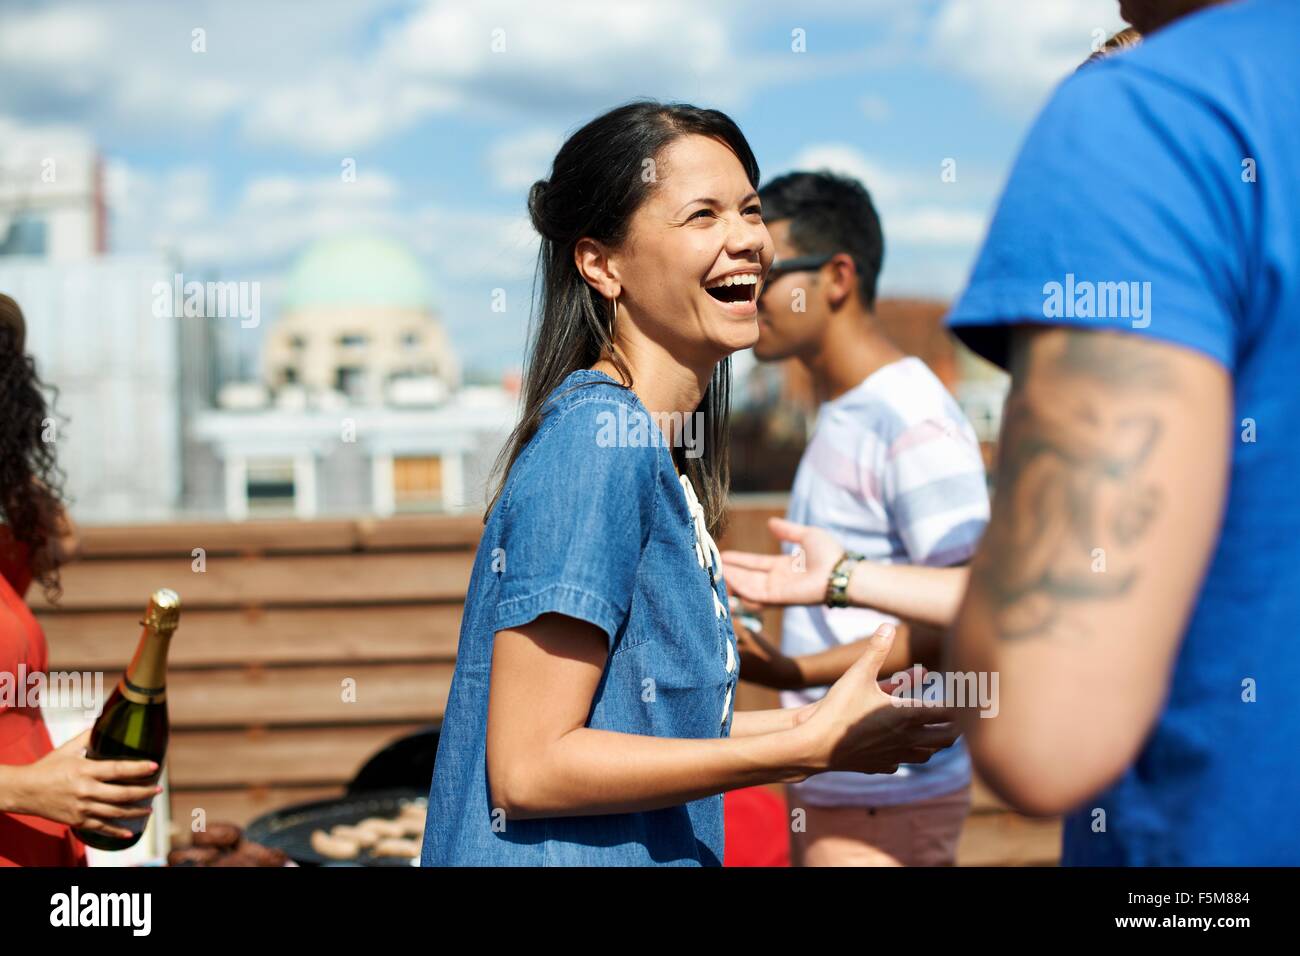 Female and male friends laughing and chatting at rooftop barbecue Stock Photo